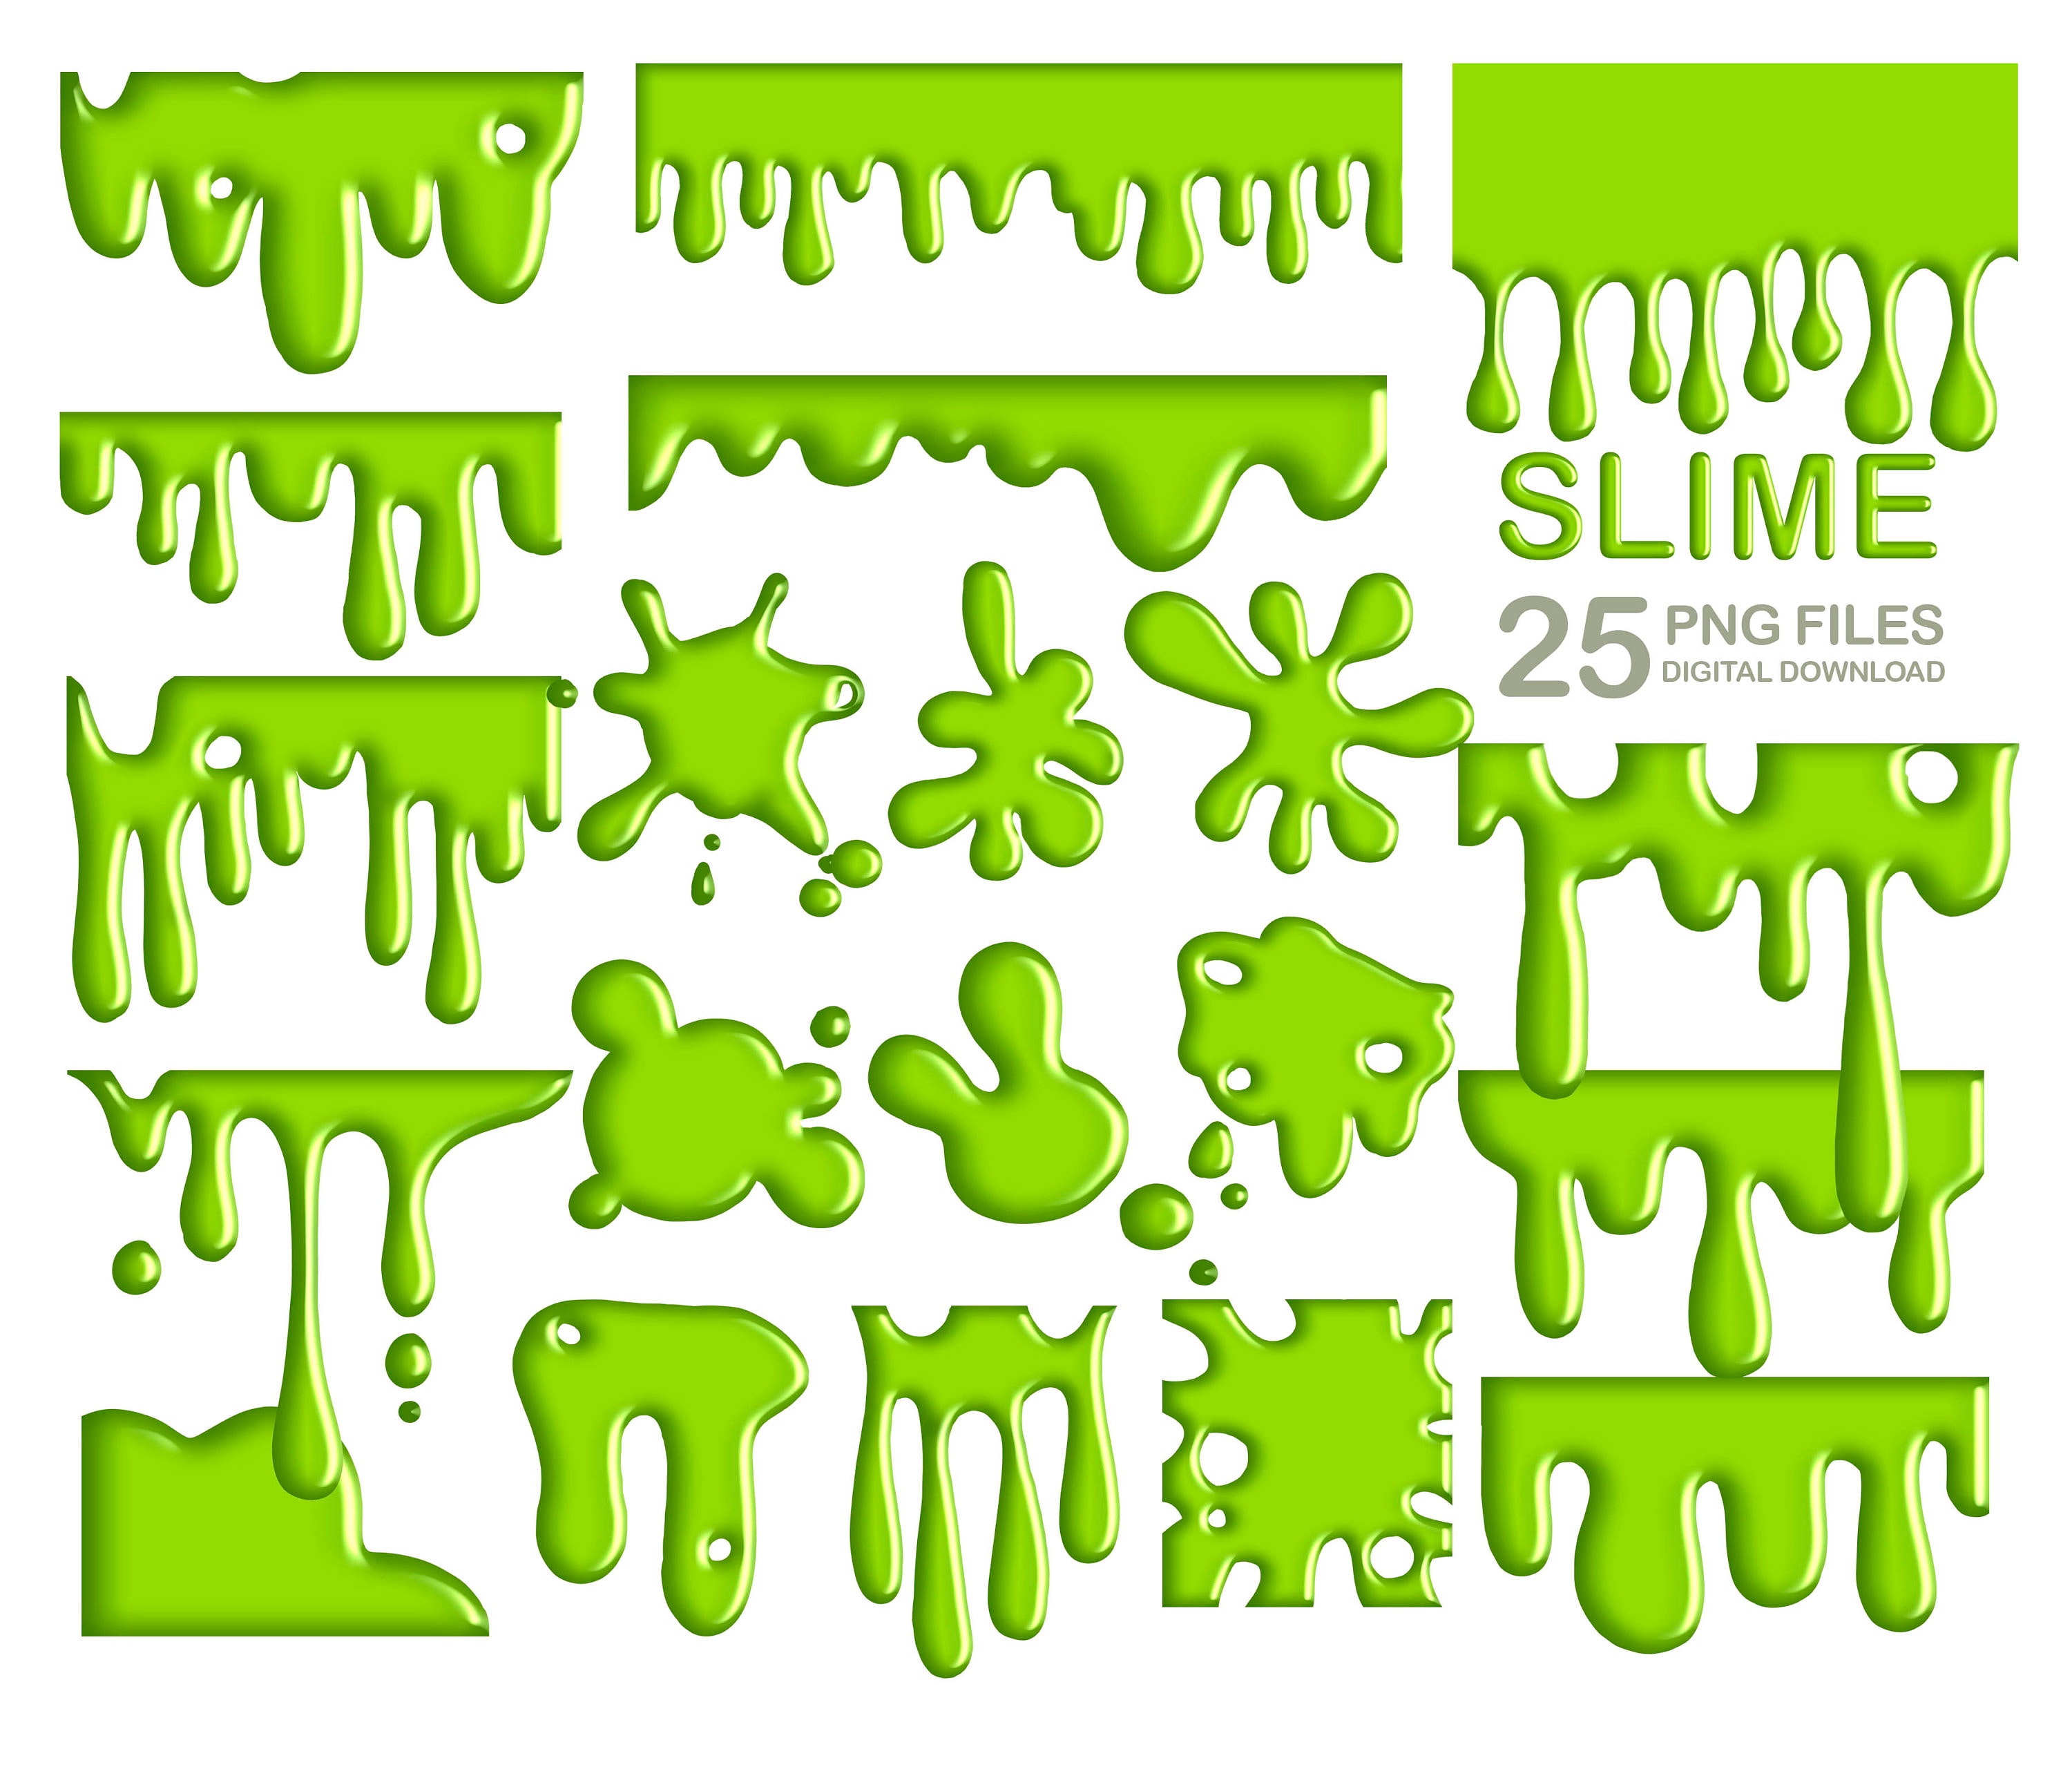 Slime Family Coloring SVG, Slime Coloring Page, Slime Birthday Theme SVG 